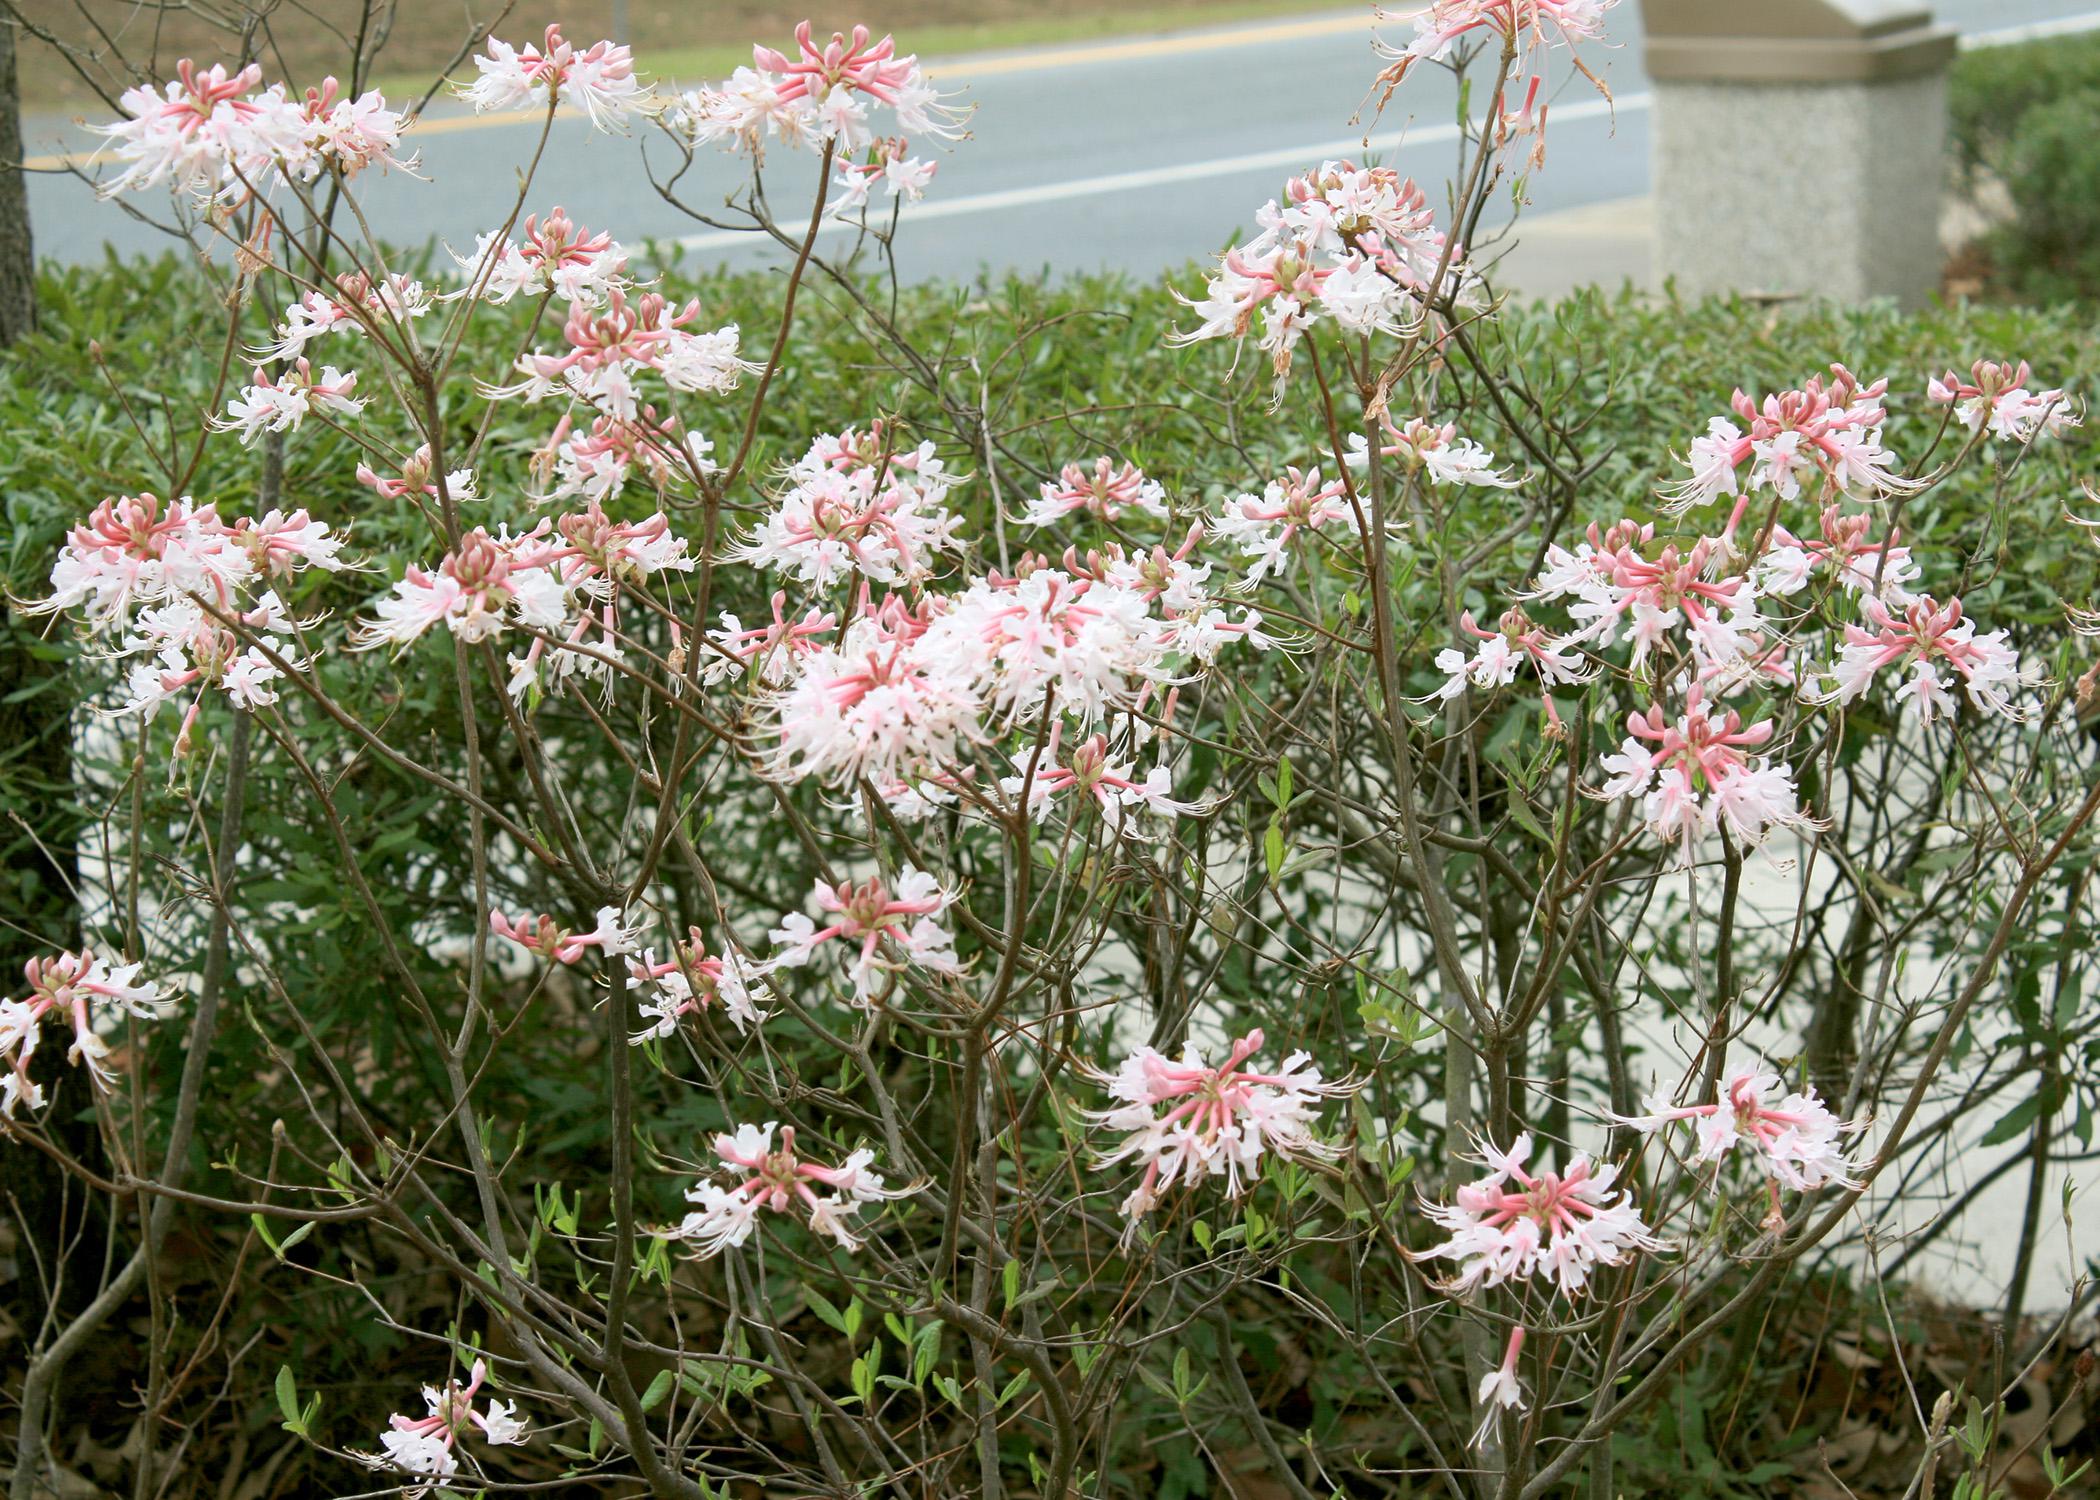 Native azaleas are easier to grow than many gardeners realize. Their blooms are colorful but small, so they are often overlooked. (Photo by MSU Extension Service/Gary Bachman)